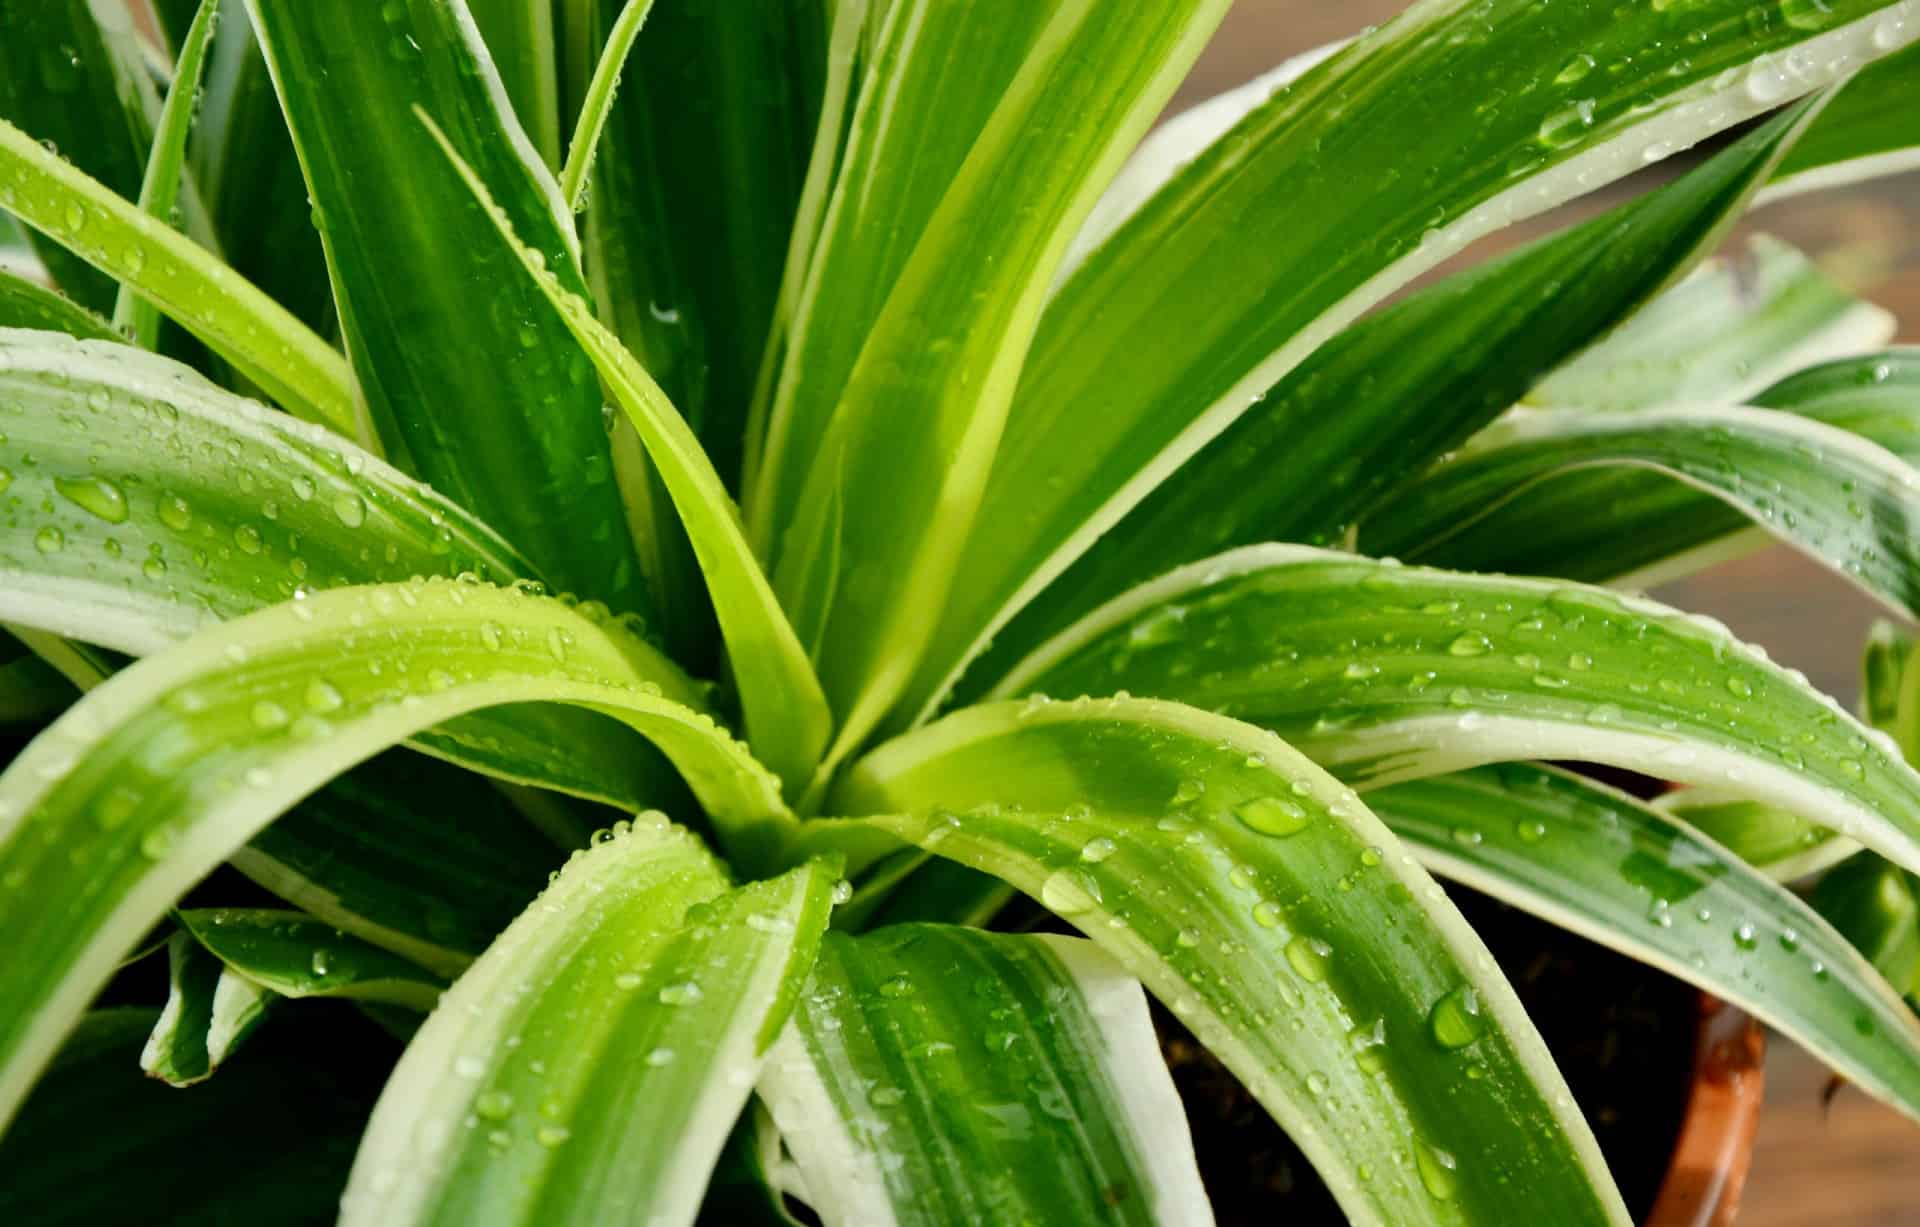 Spider plant leaves have an arching shape.